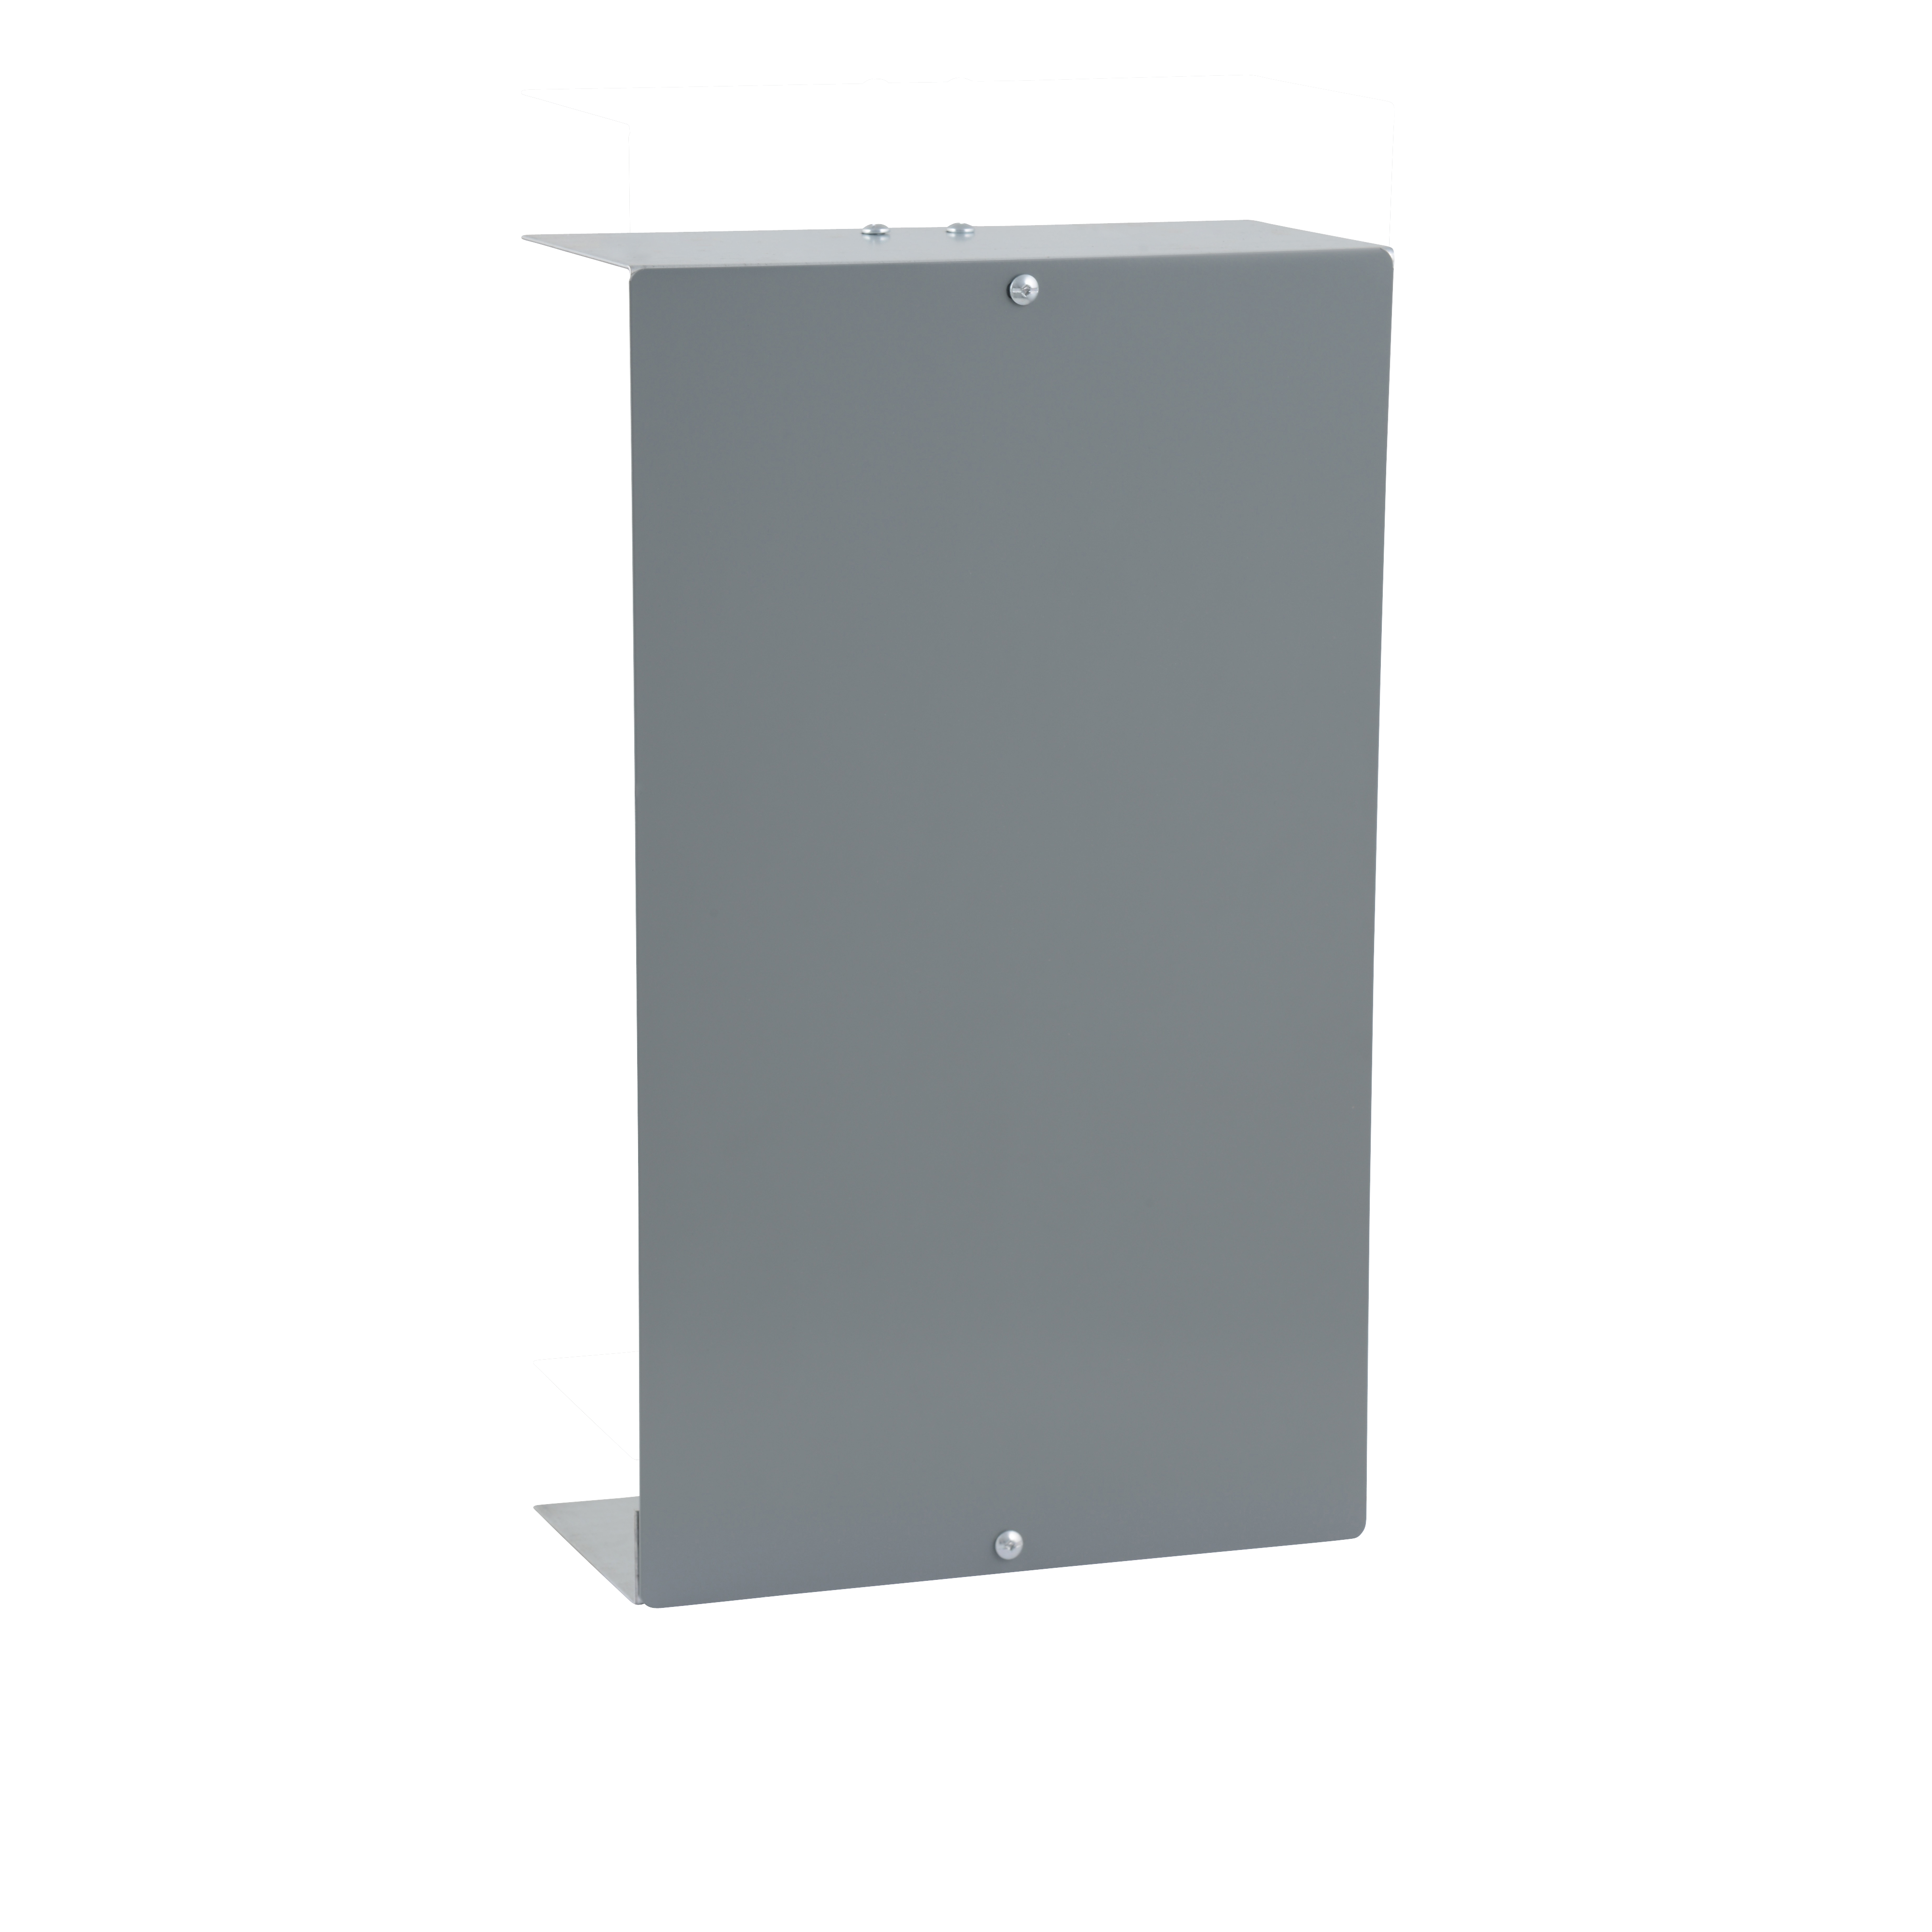 Enclosure Panel Skirt Assembly, NQNF, Type 1, 20x23x5.75in